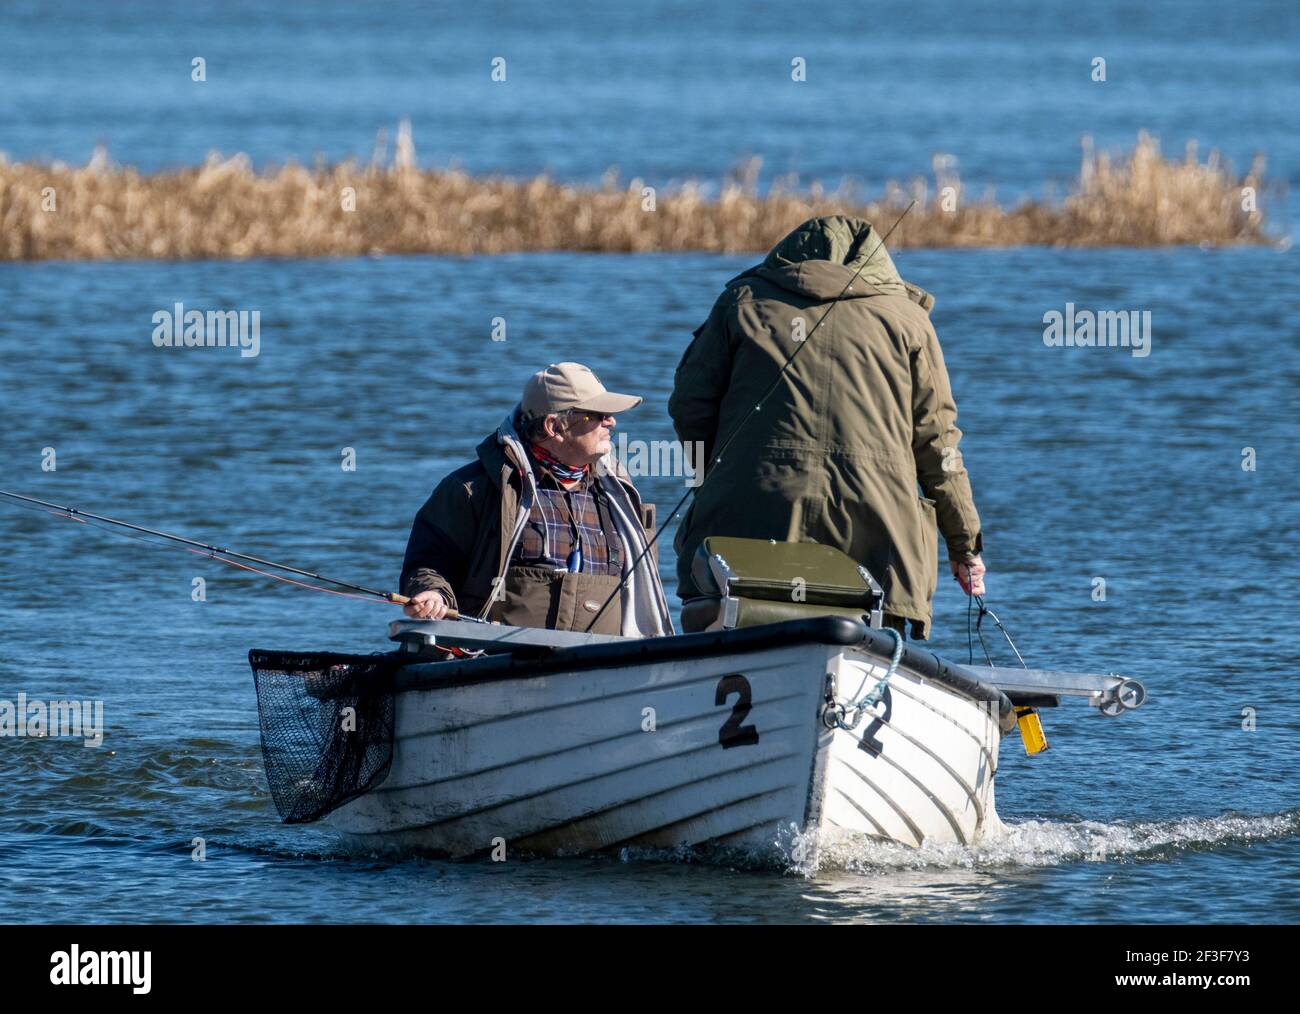 Men fly fishing from boats on Linlithgow Loch with Linlithgow